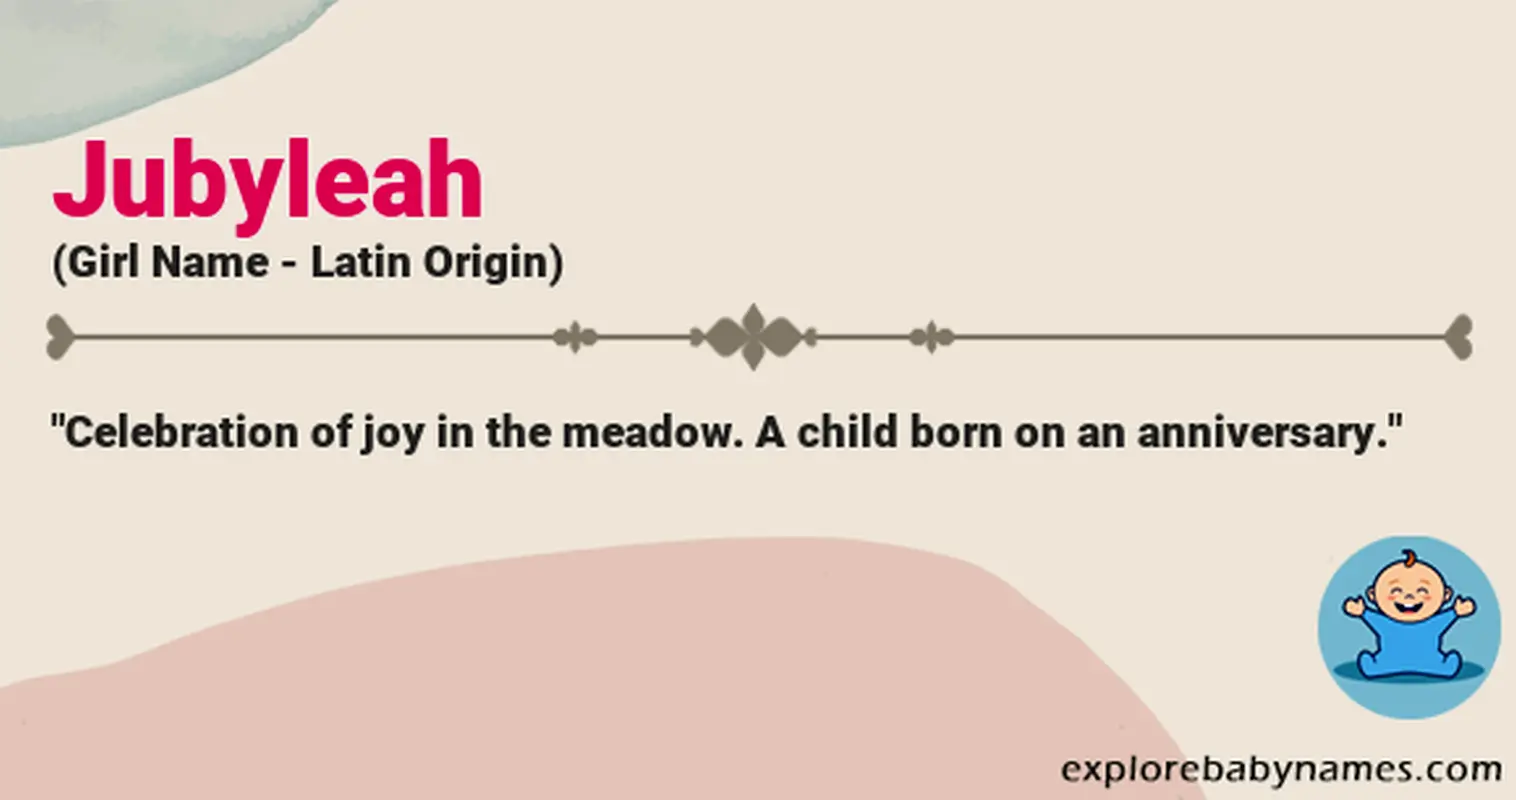 Meaning of Jubyleah